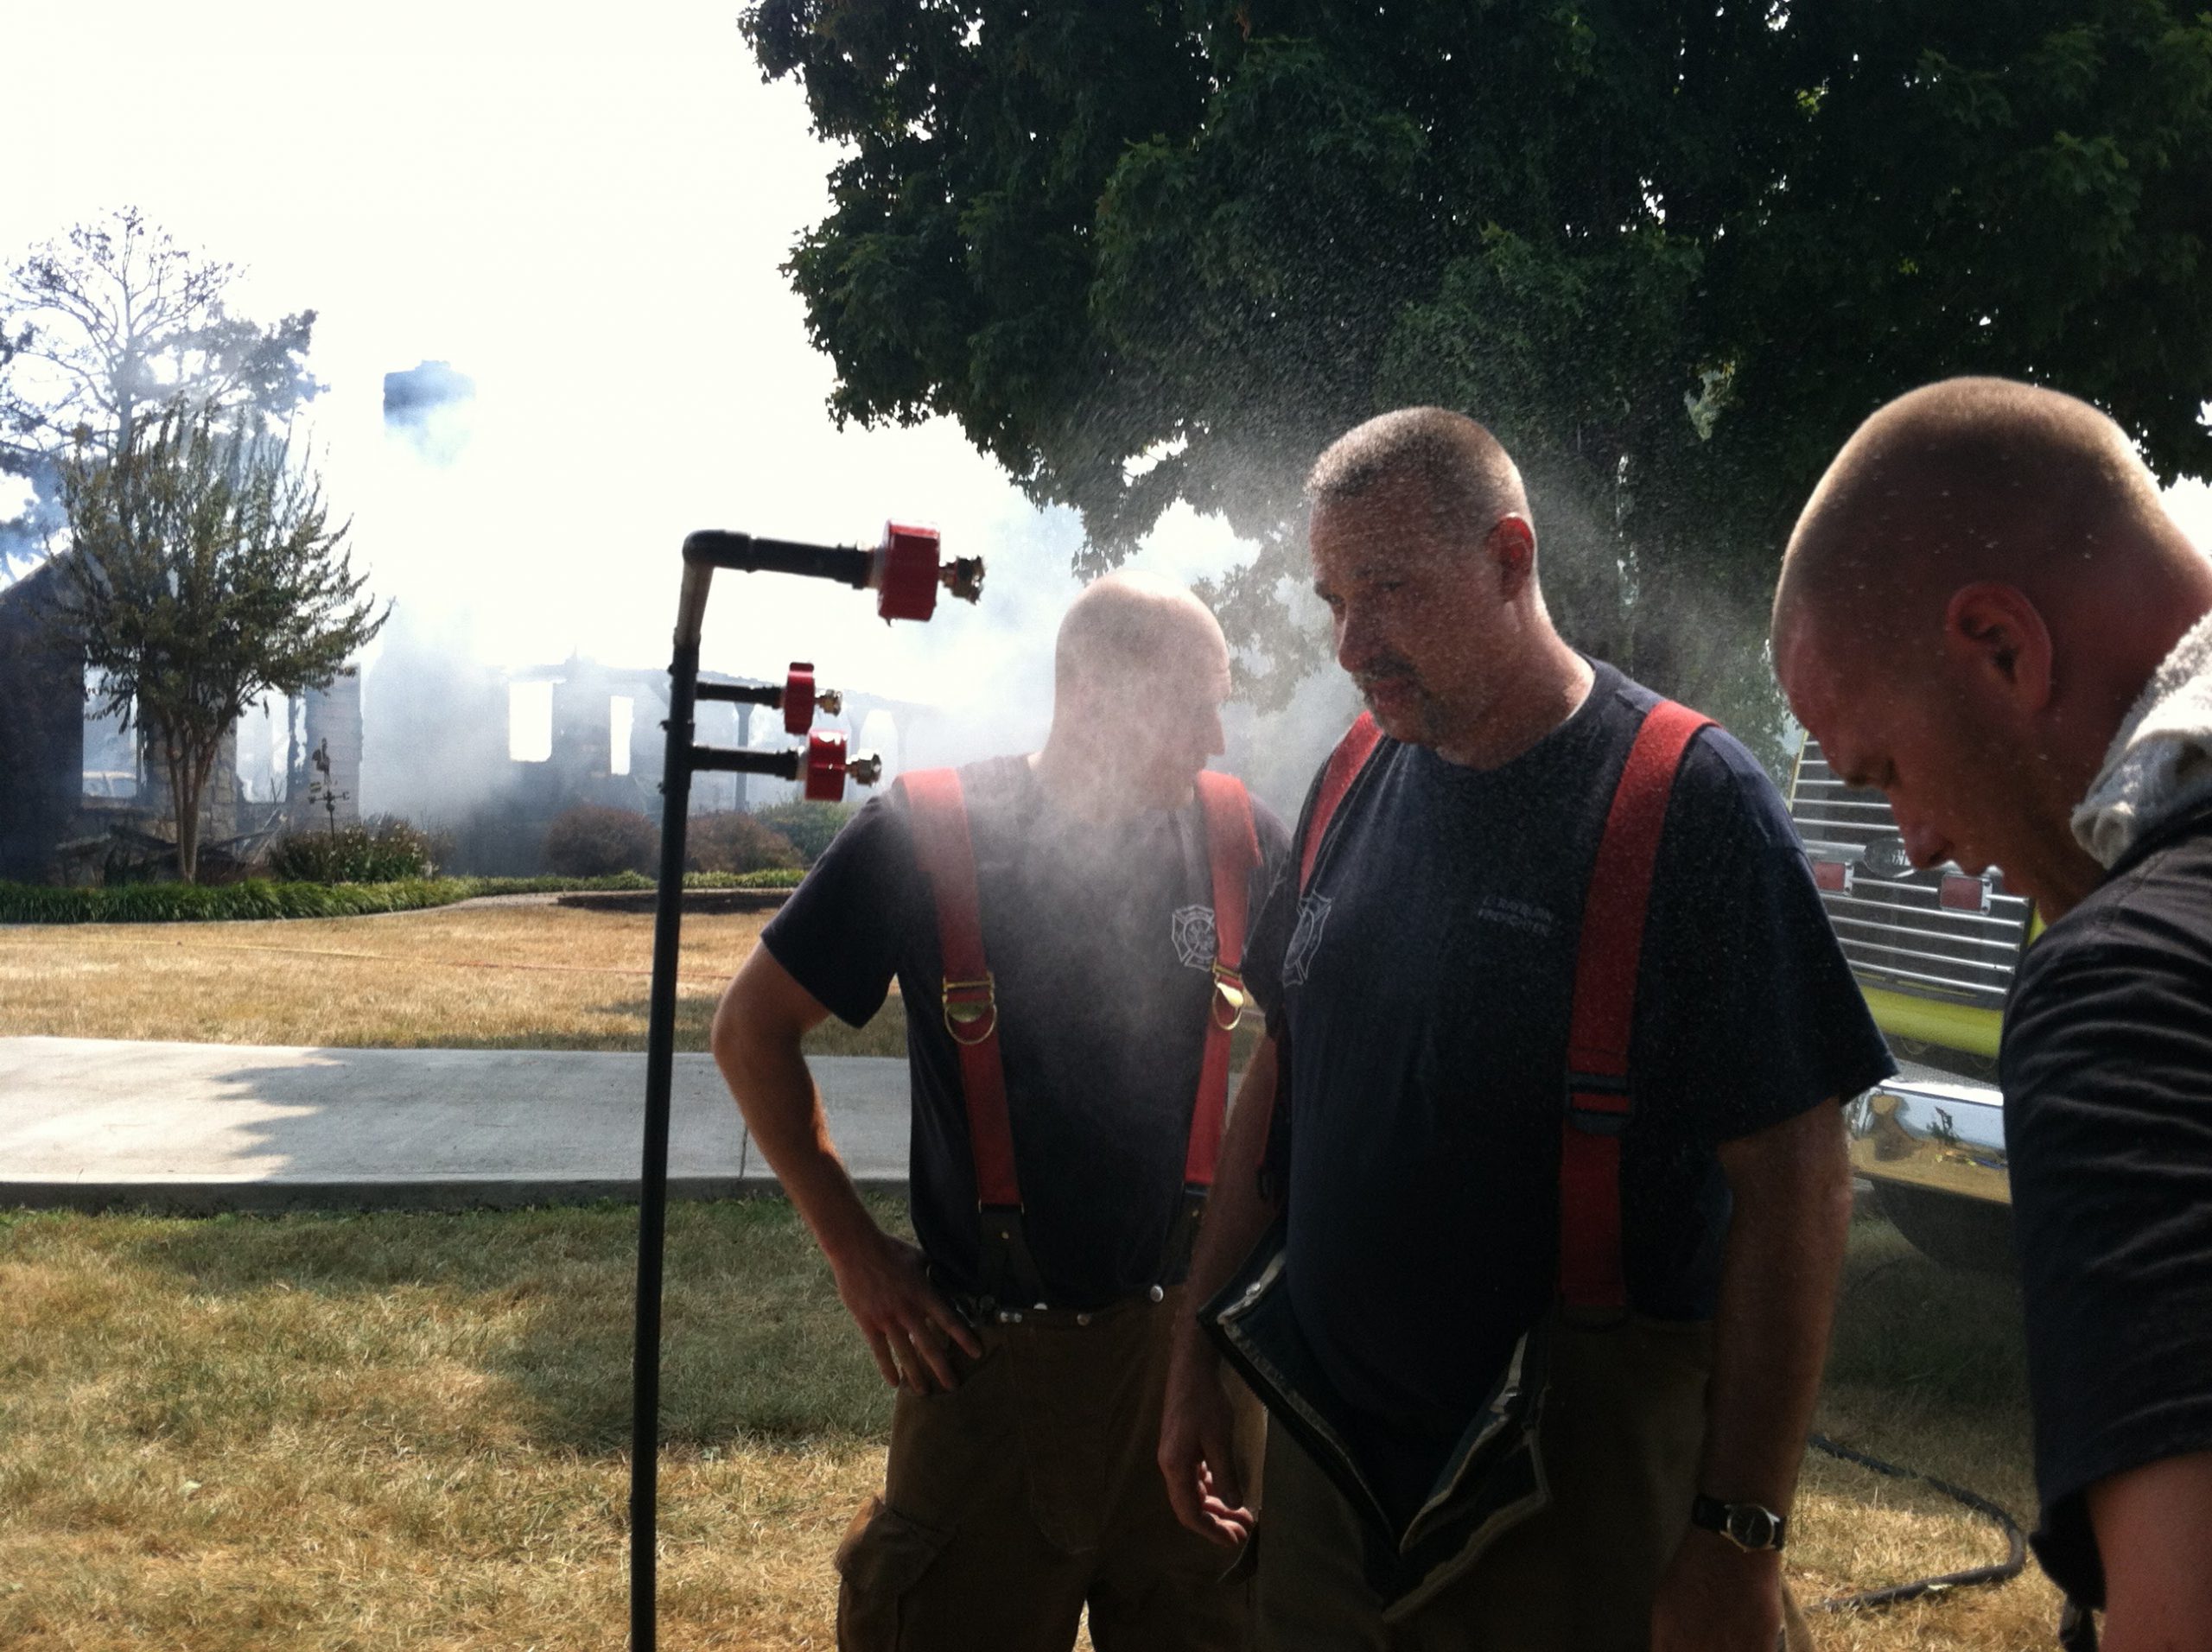 rehab cap with misting nozzles to cool firefighters